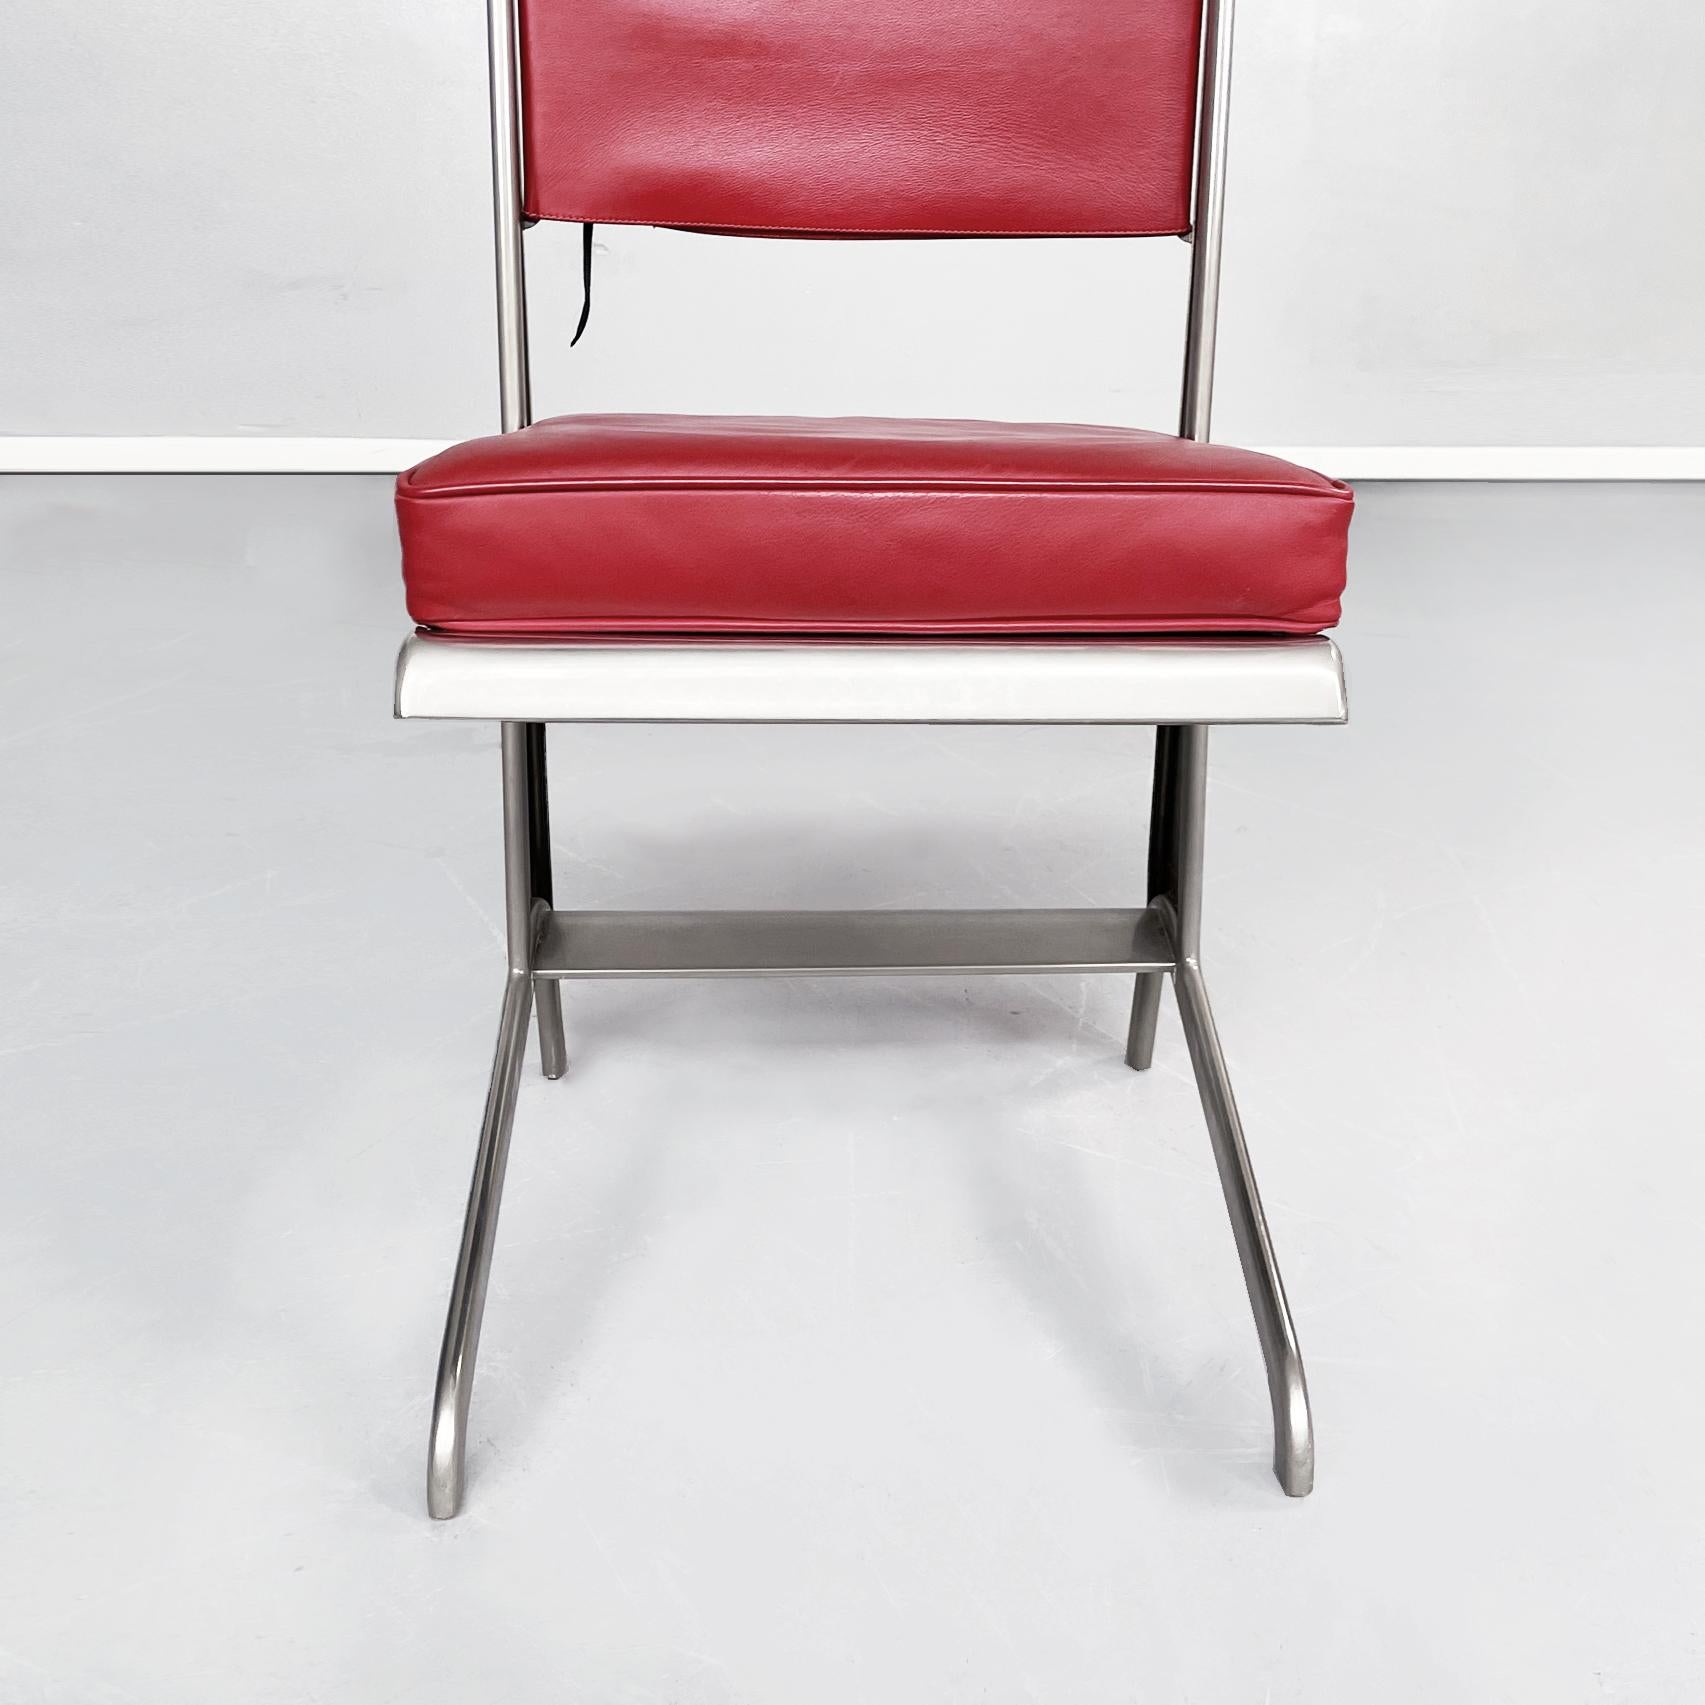 French Mid-Century Red Leather and Steel Chairs by Jean Prouvé for Tecta, 1980s 3